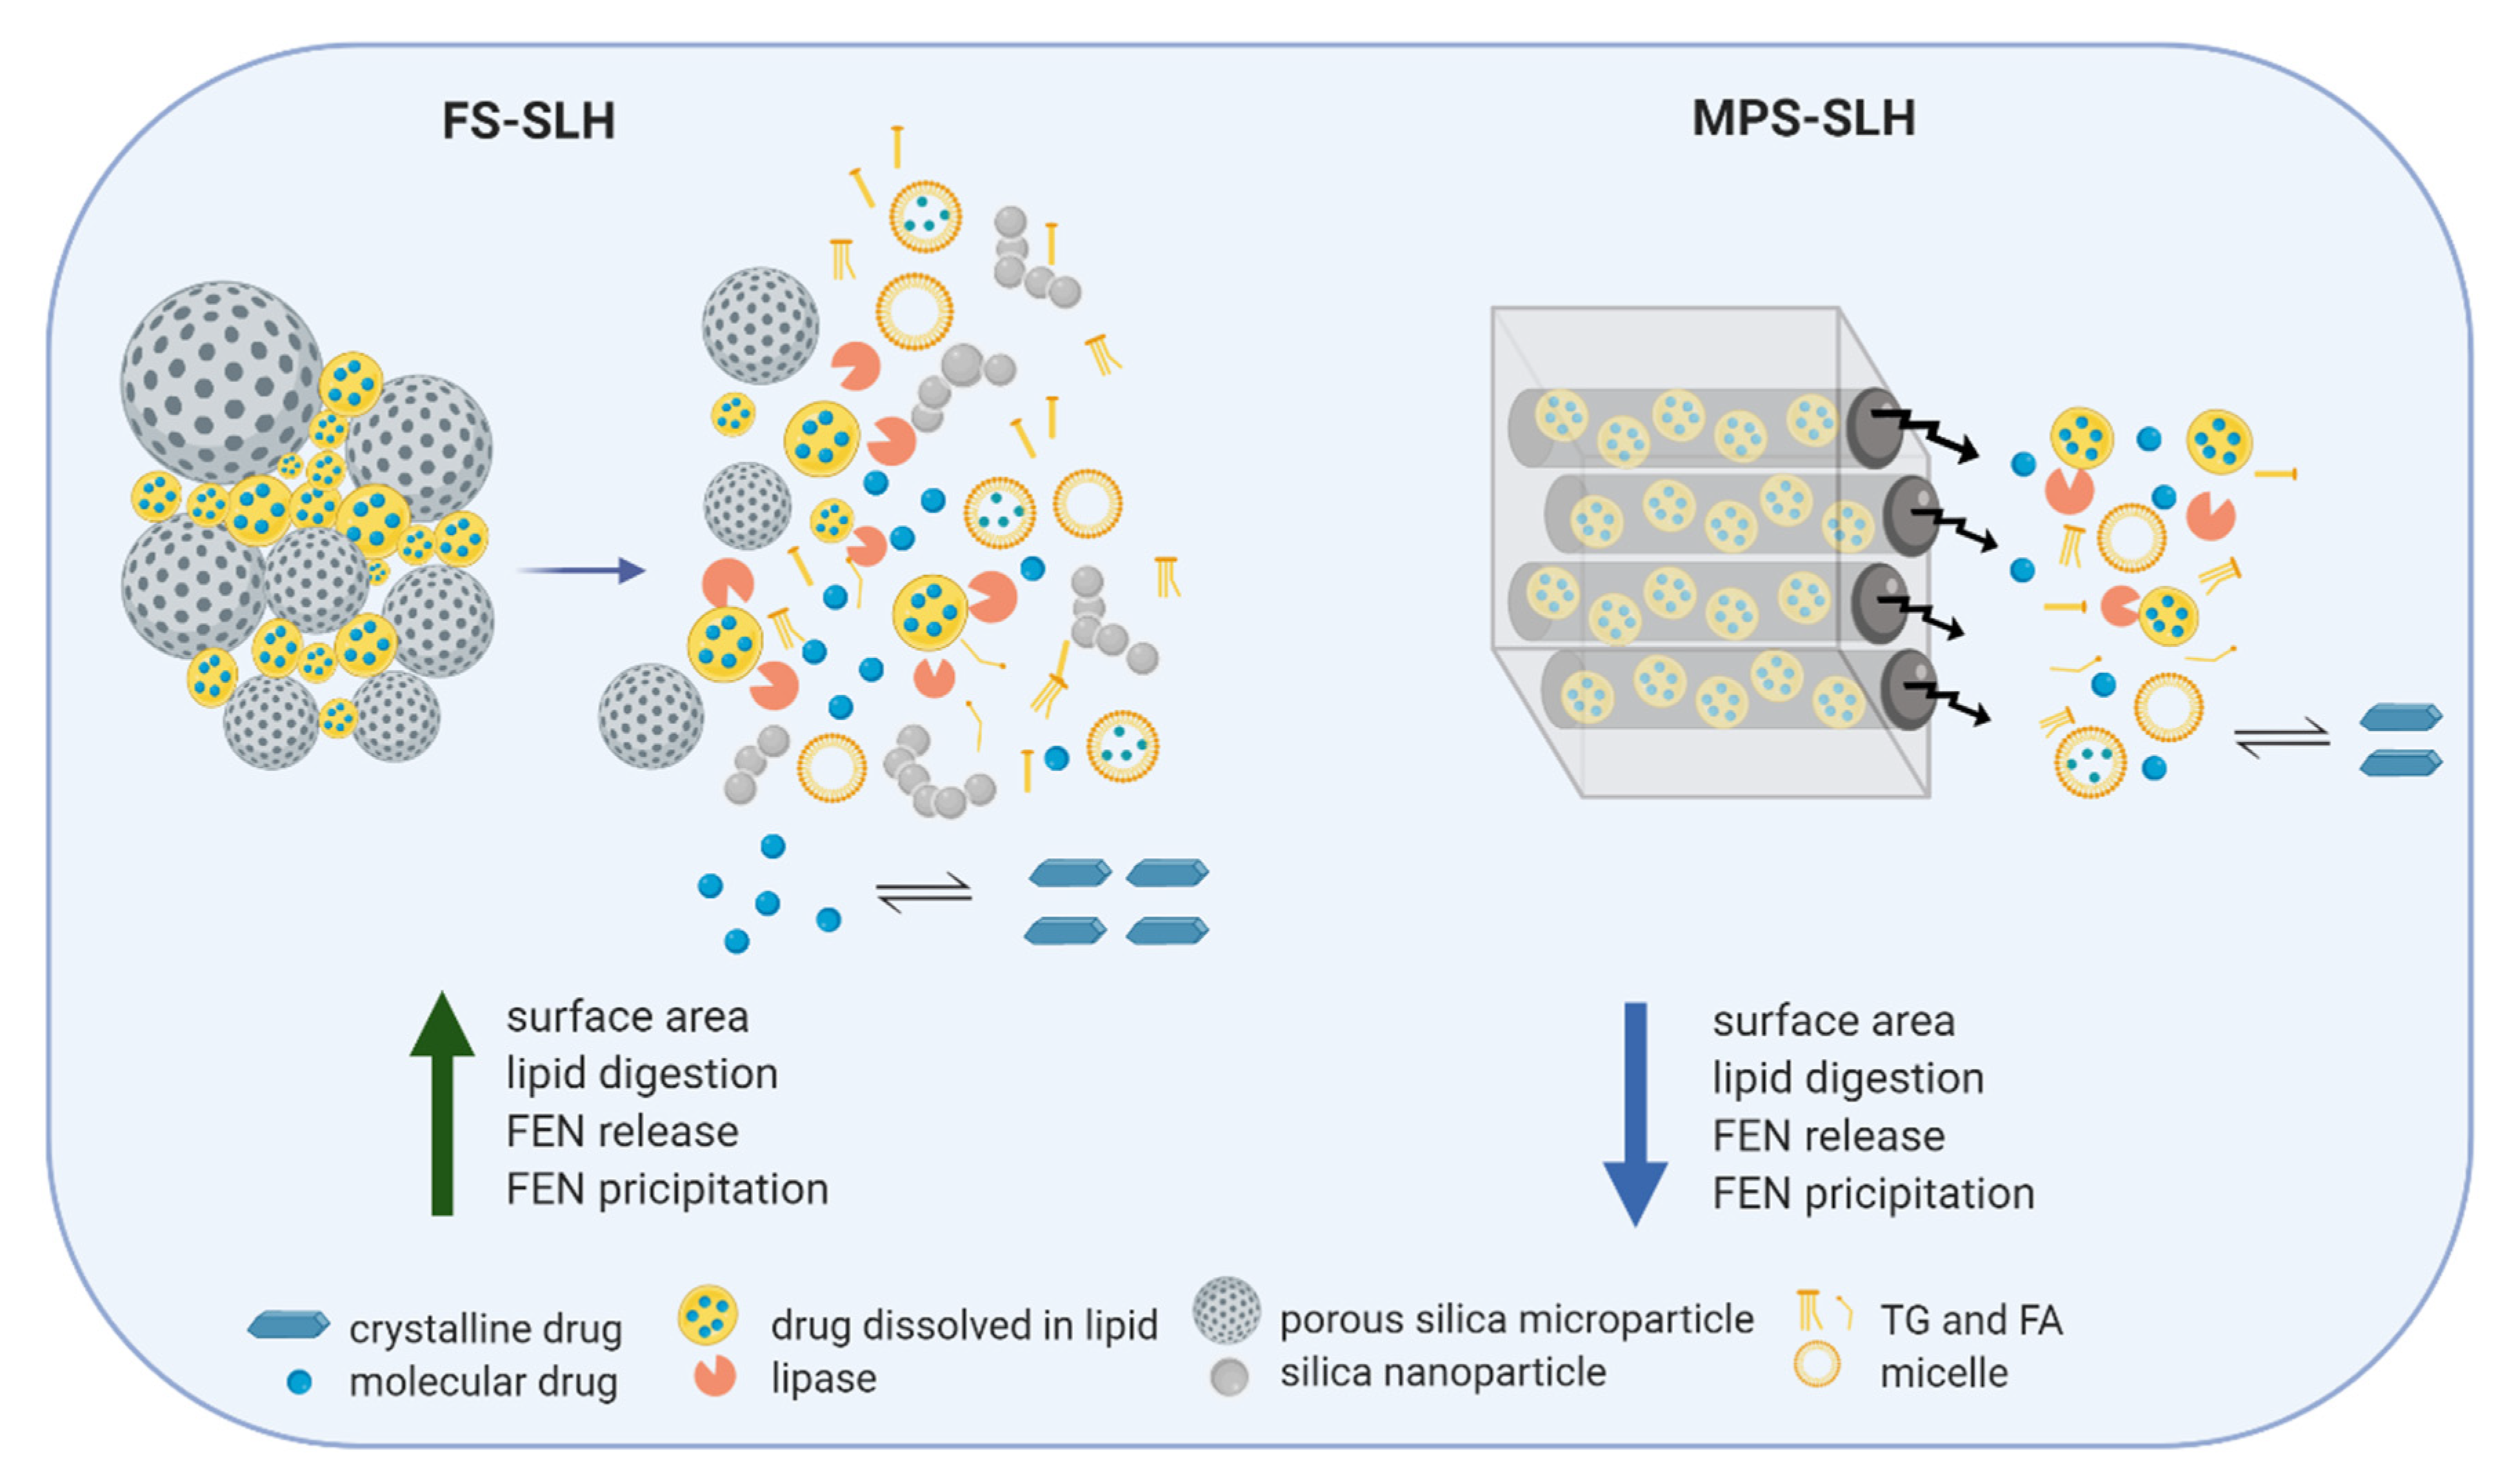 Pharmaceutics Free Full Text Porous Nanostructure Lipid Composition And Degree Of Drug Supersaturation Modulate In Vitro Fenofibrate Solubilization In Silica Lipid Hybrids Html